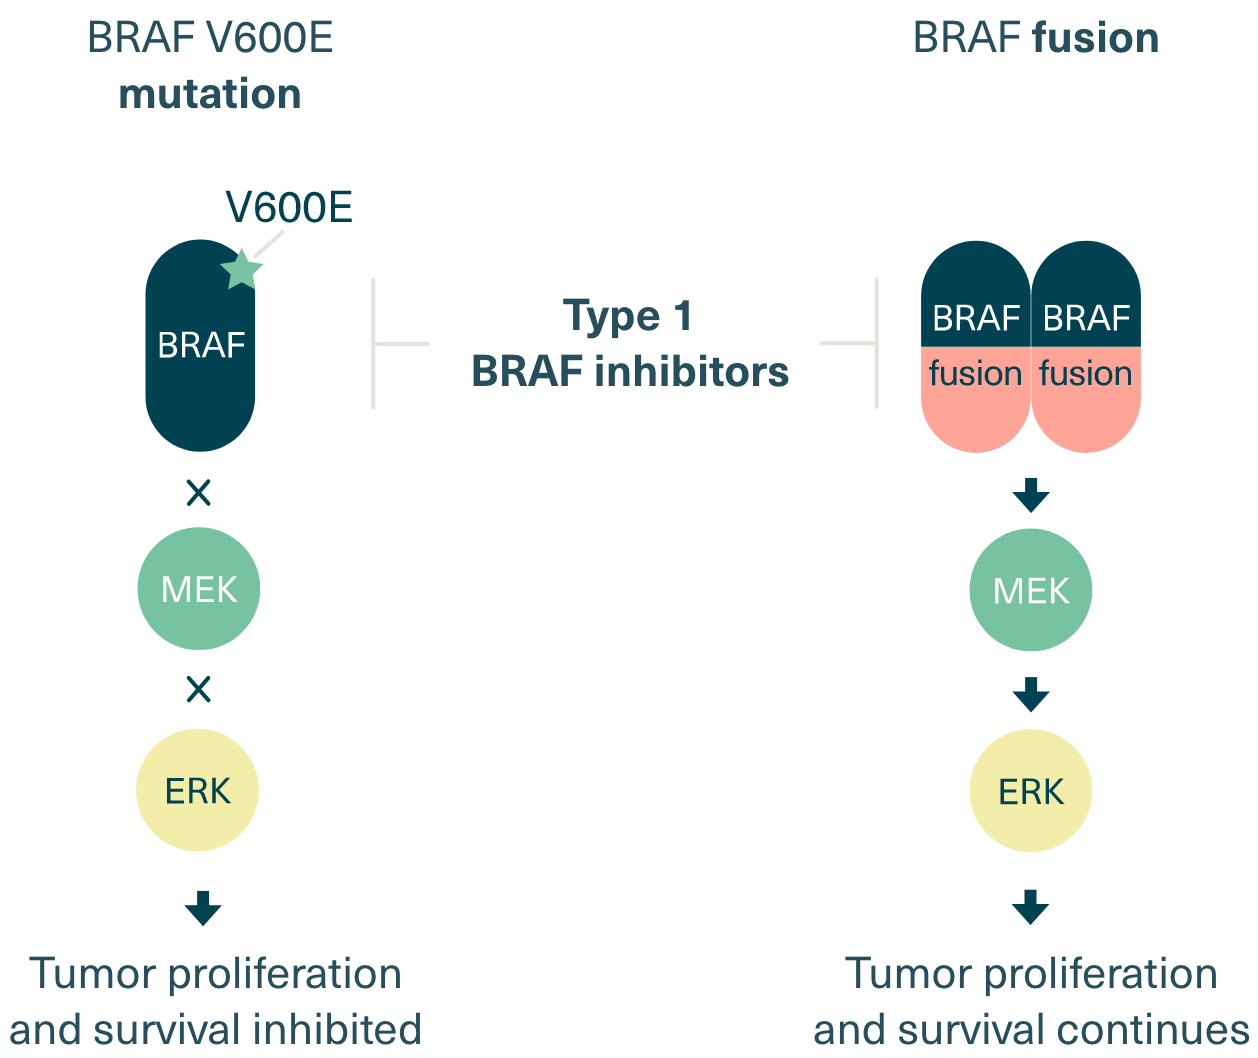 Comparison of BRAF mutation and fusion inhibition from type 1 BRAF inhibitors